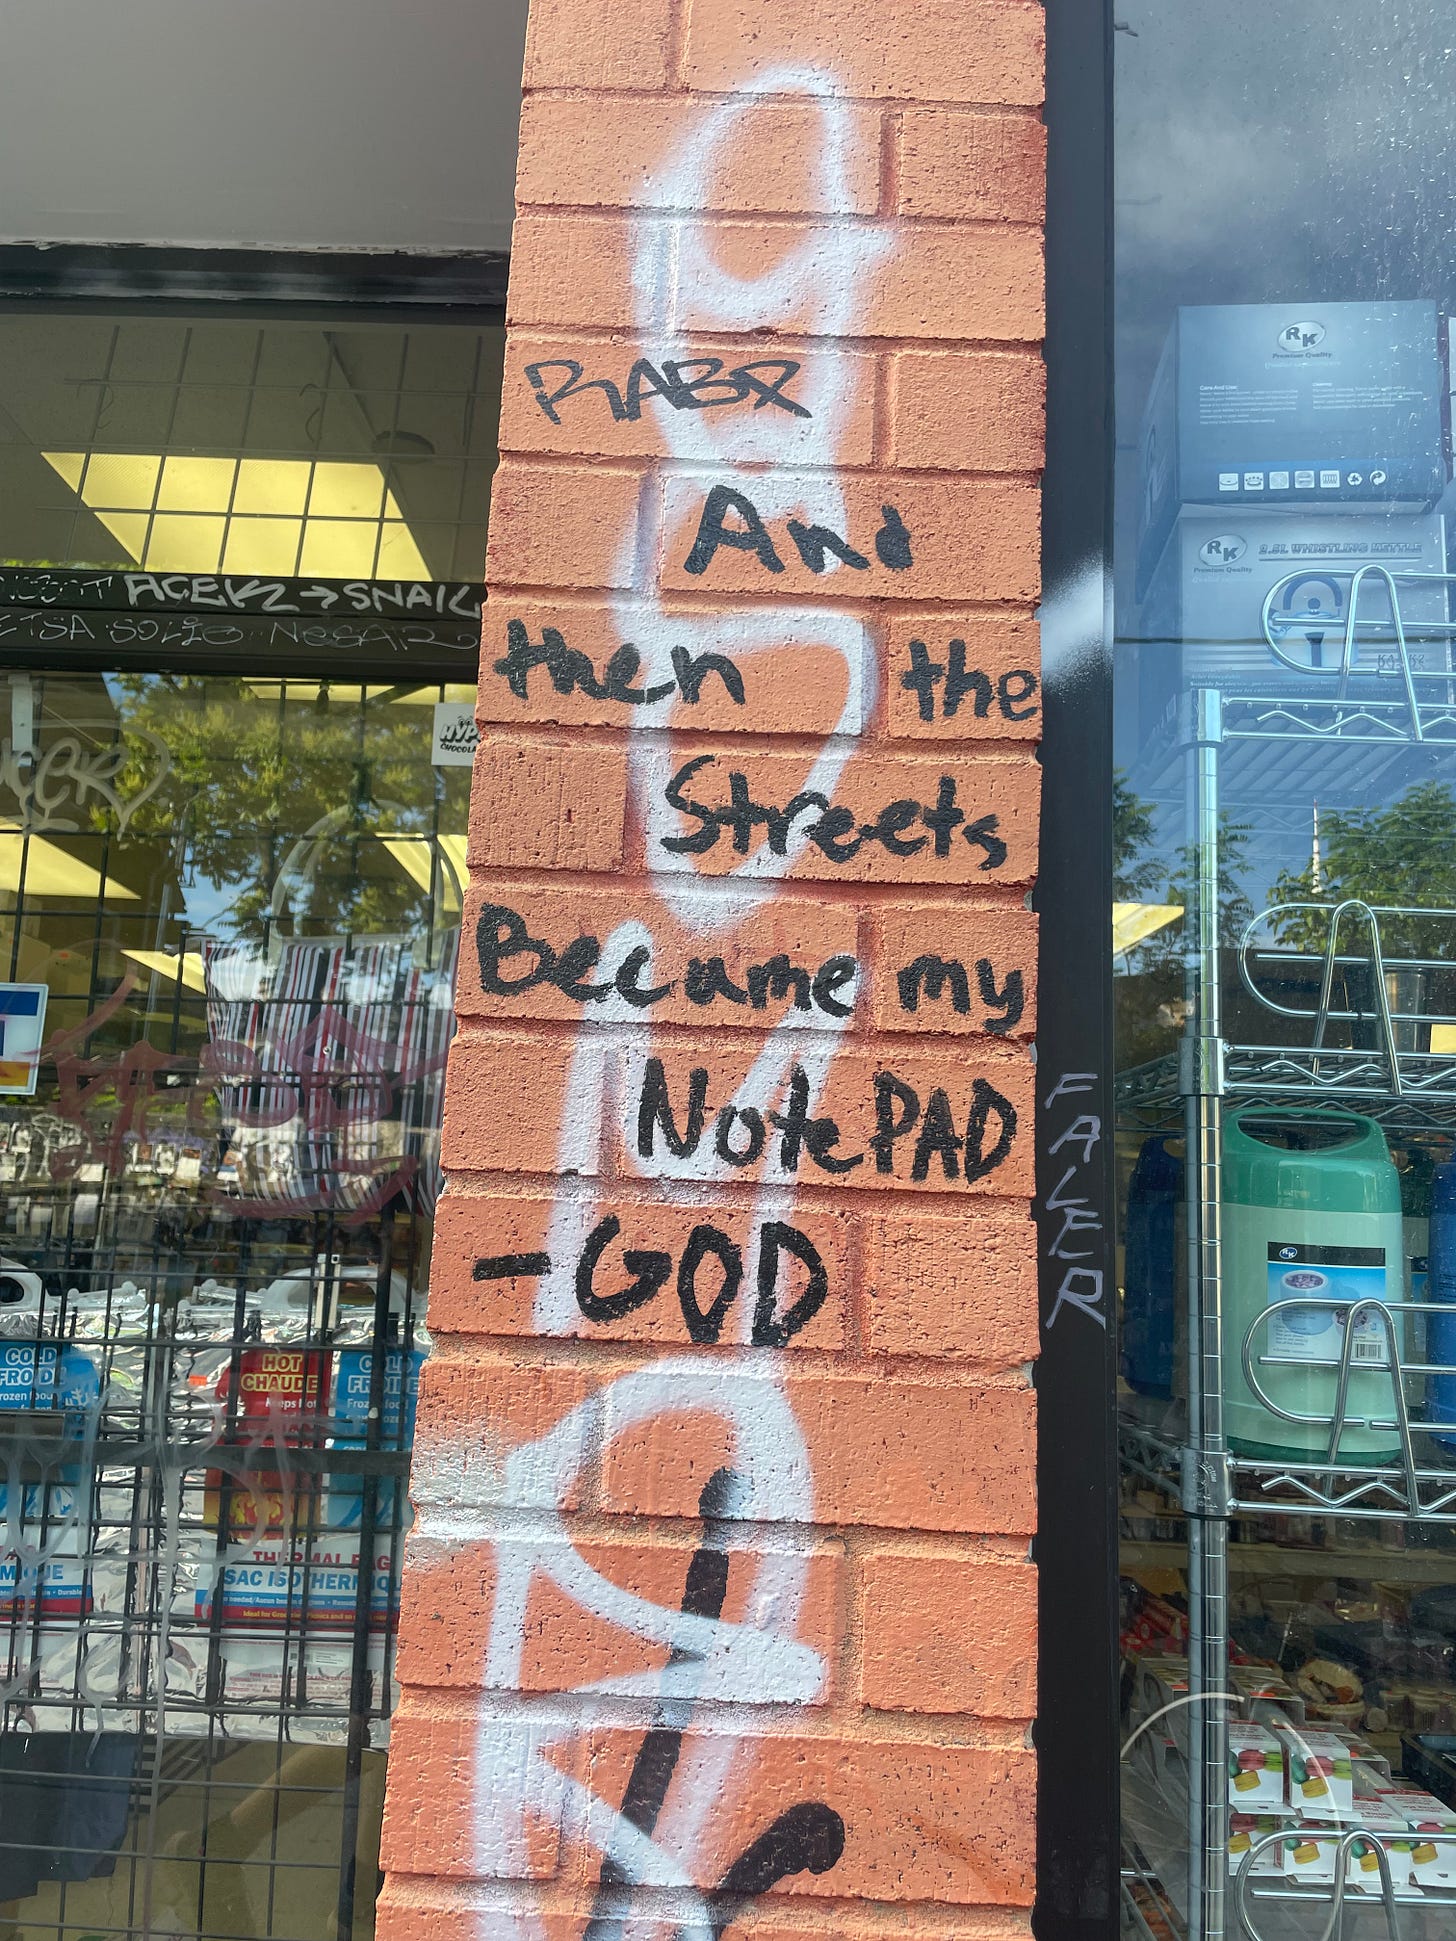 Graffiti on a wall states: And then the streets became my notepad. -God